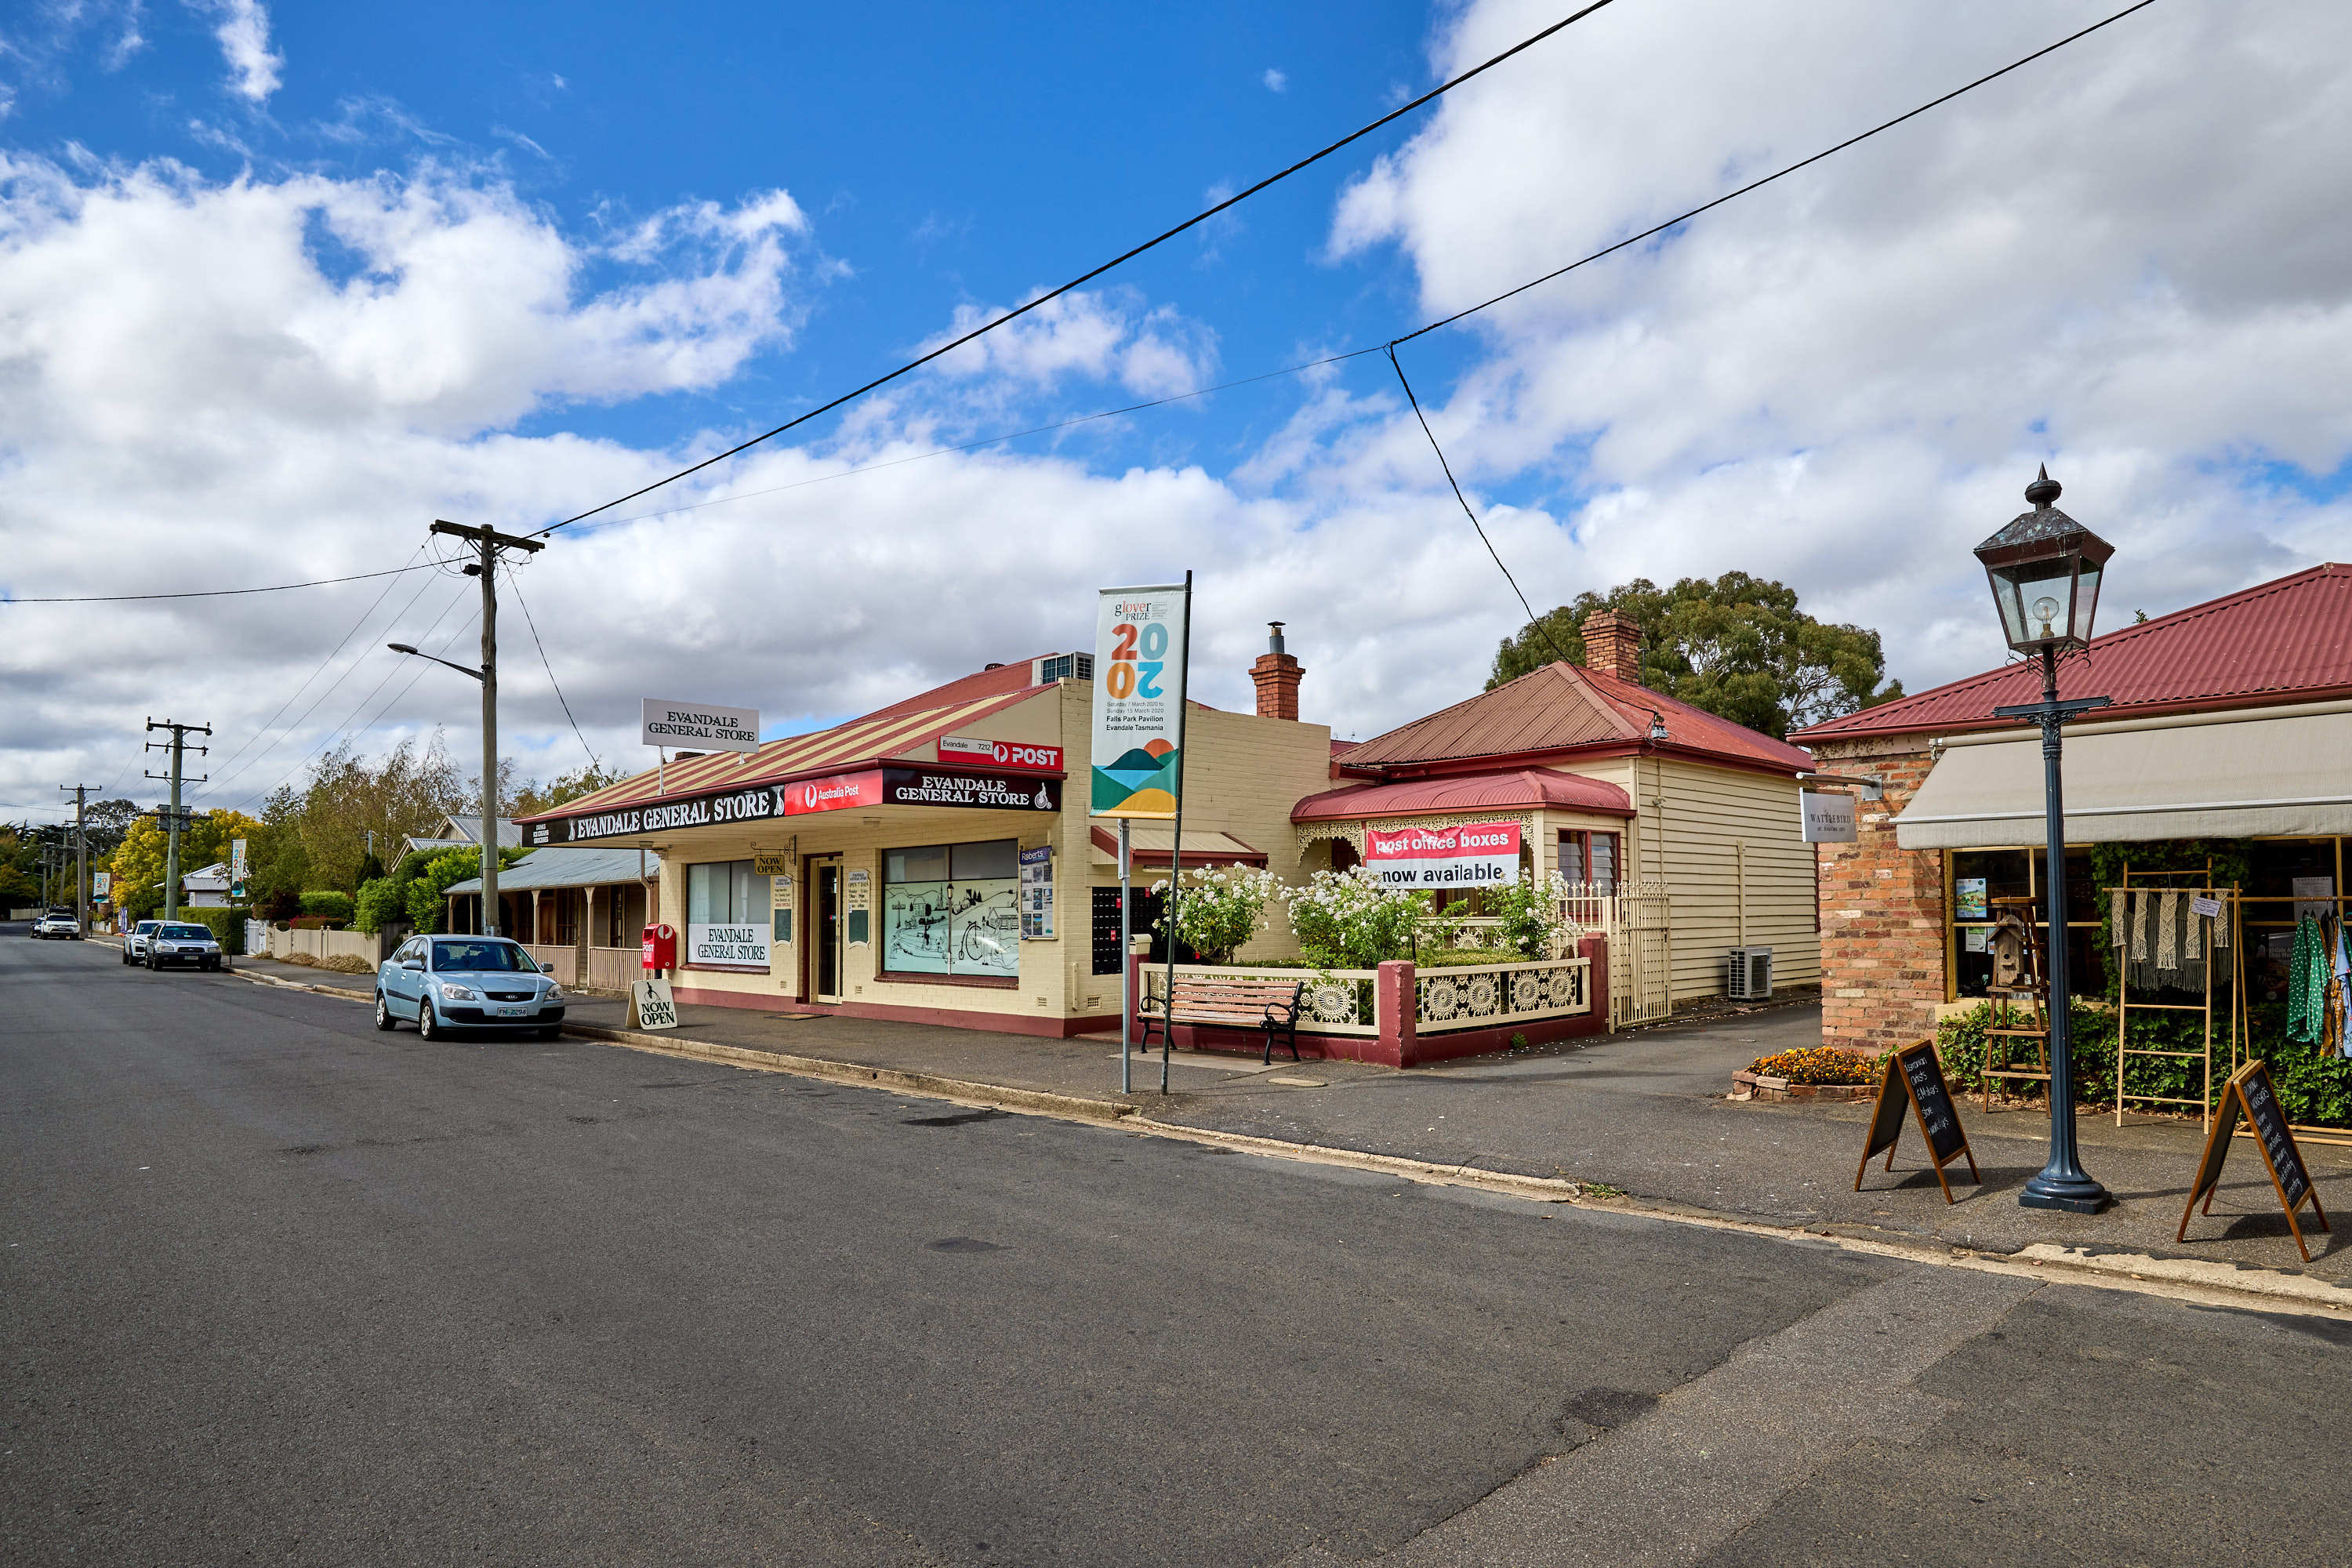 Evandale General Store & Post Office image 1